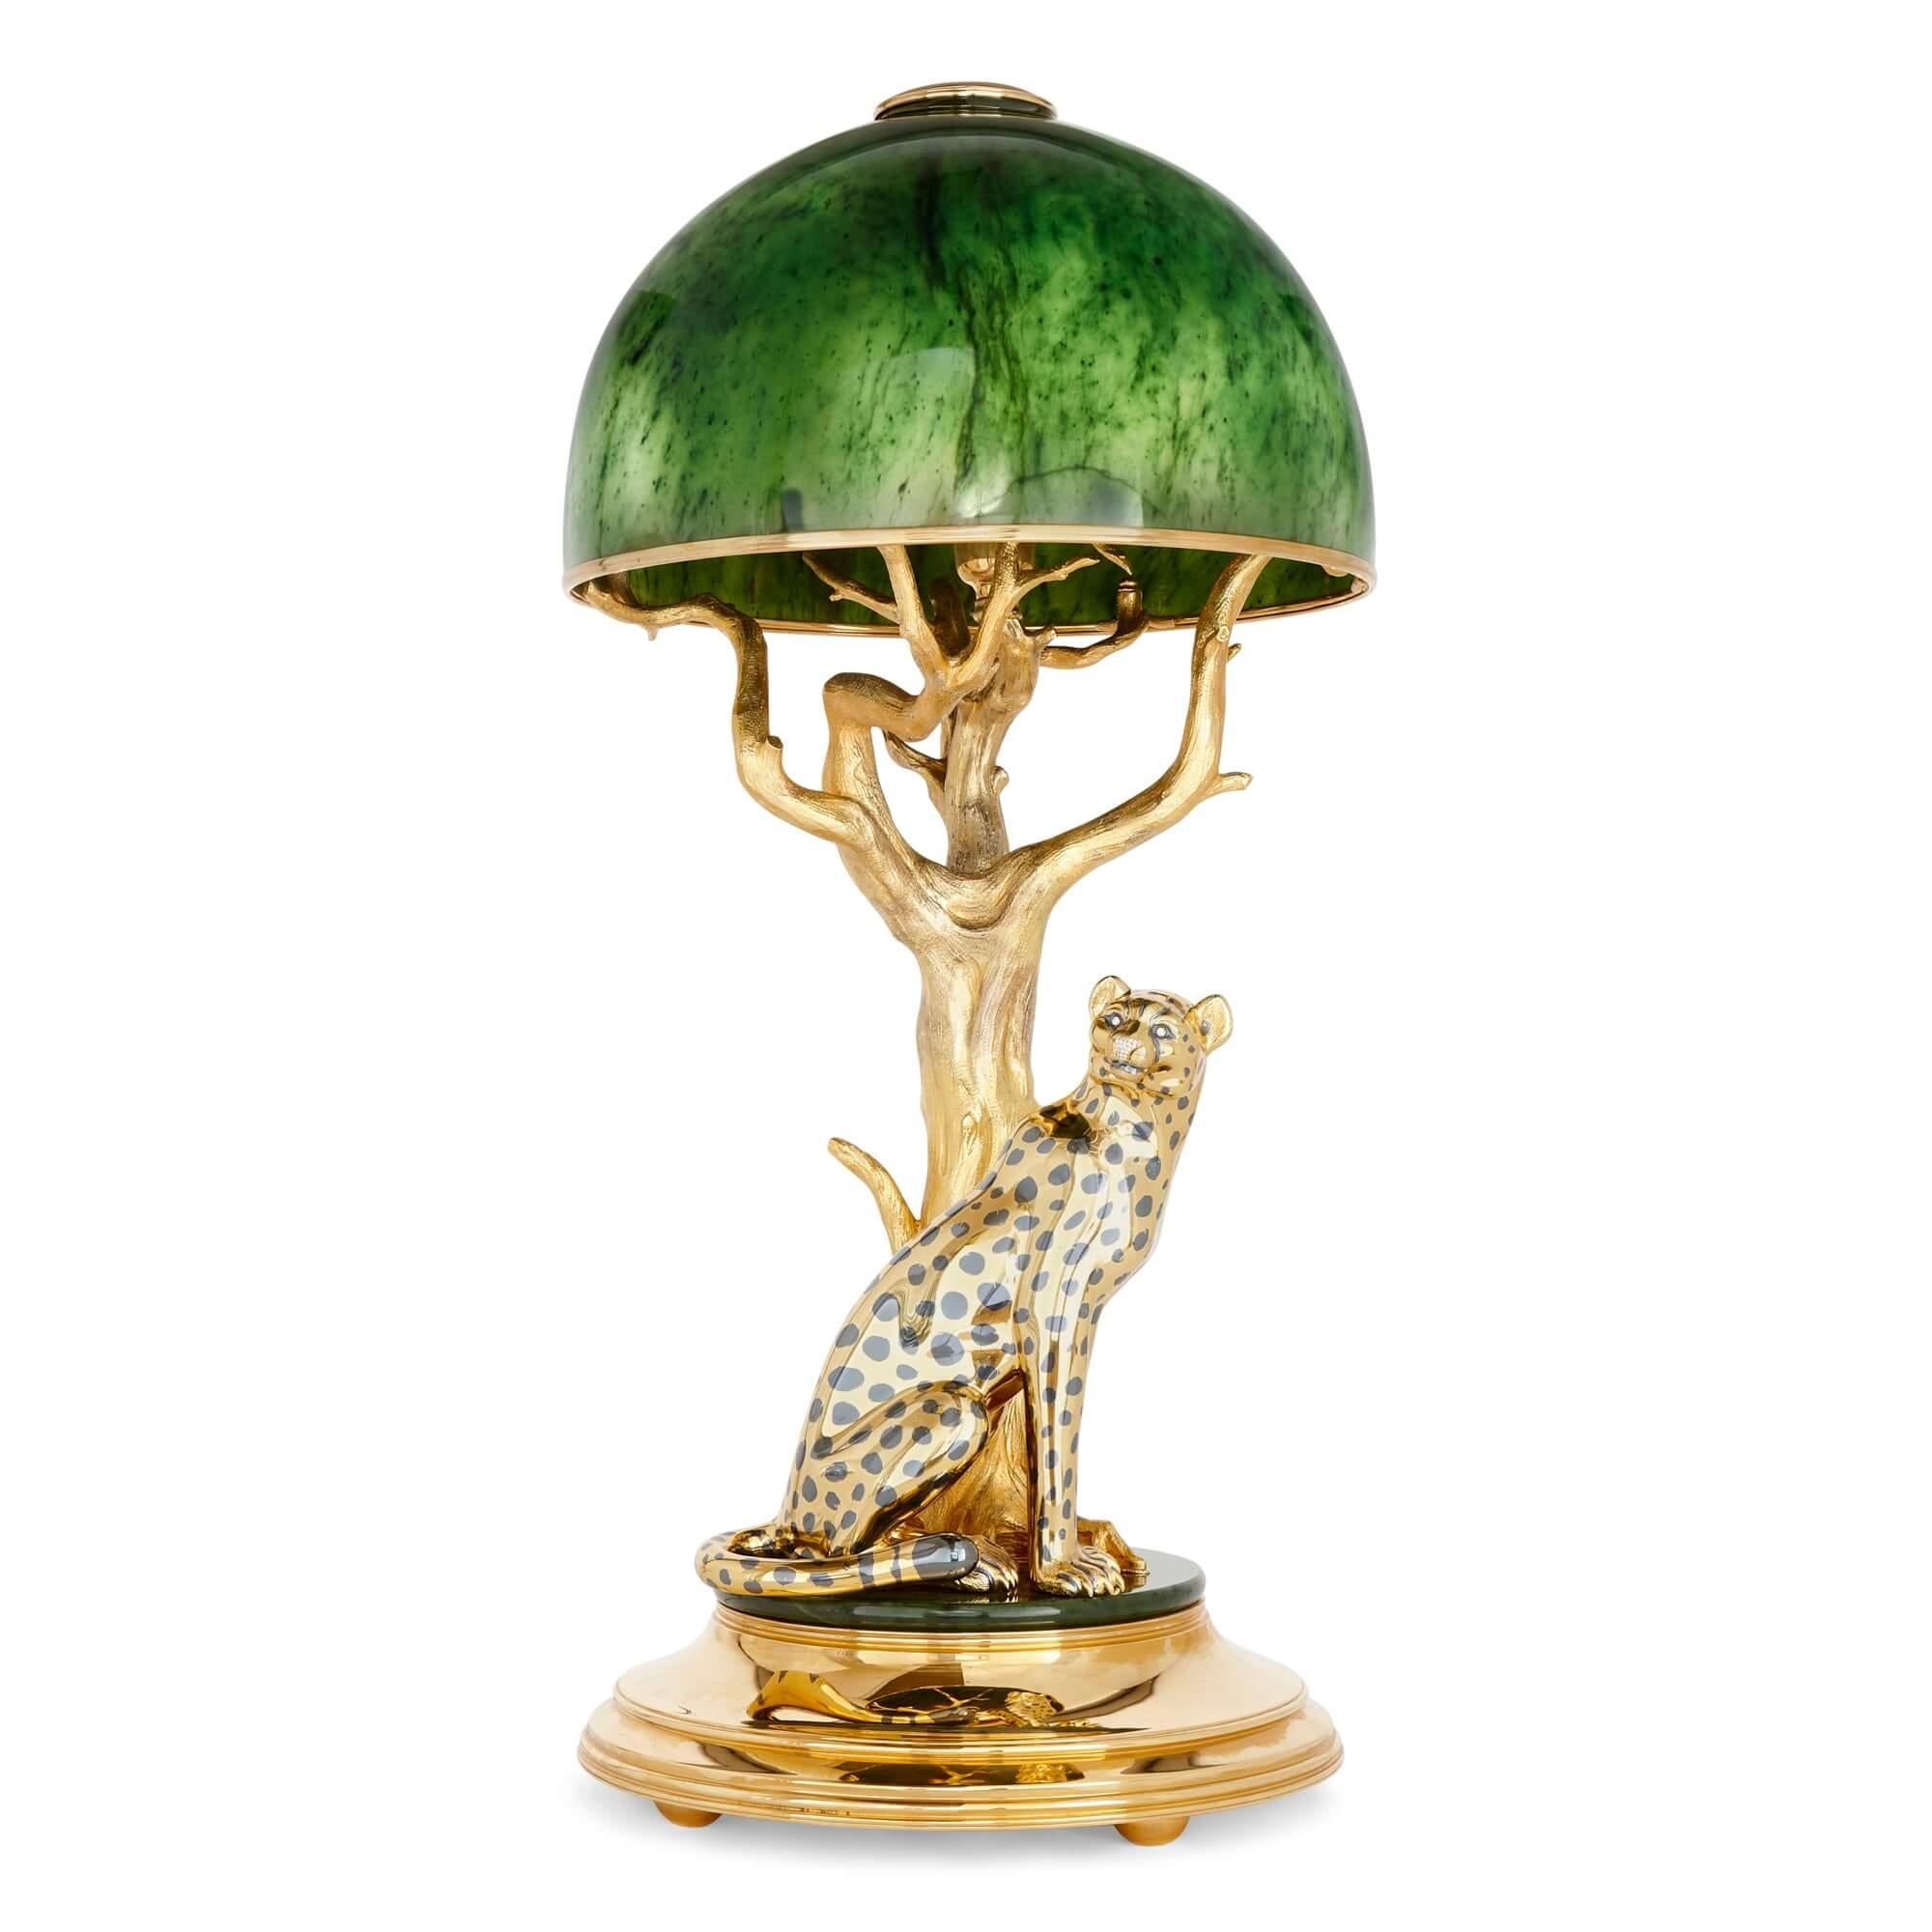 Nephrite, diamond, gilt metal lamp with a cheetah by Asprey 
English, c. 1980
Height 90cm, diameter 42cm

This superb sculptural lamp depicts a cheetah elegantly sitting under a tree. Made in around 1980, by the well-known English firm of Asprey,